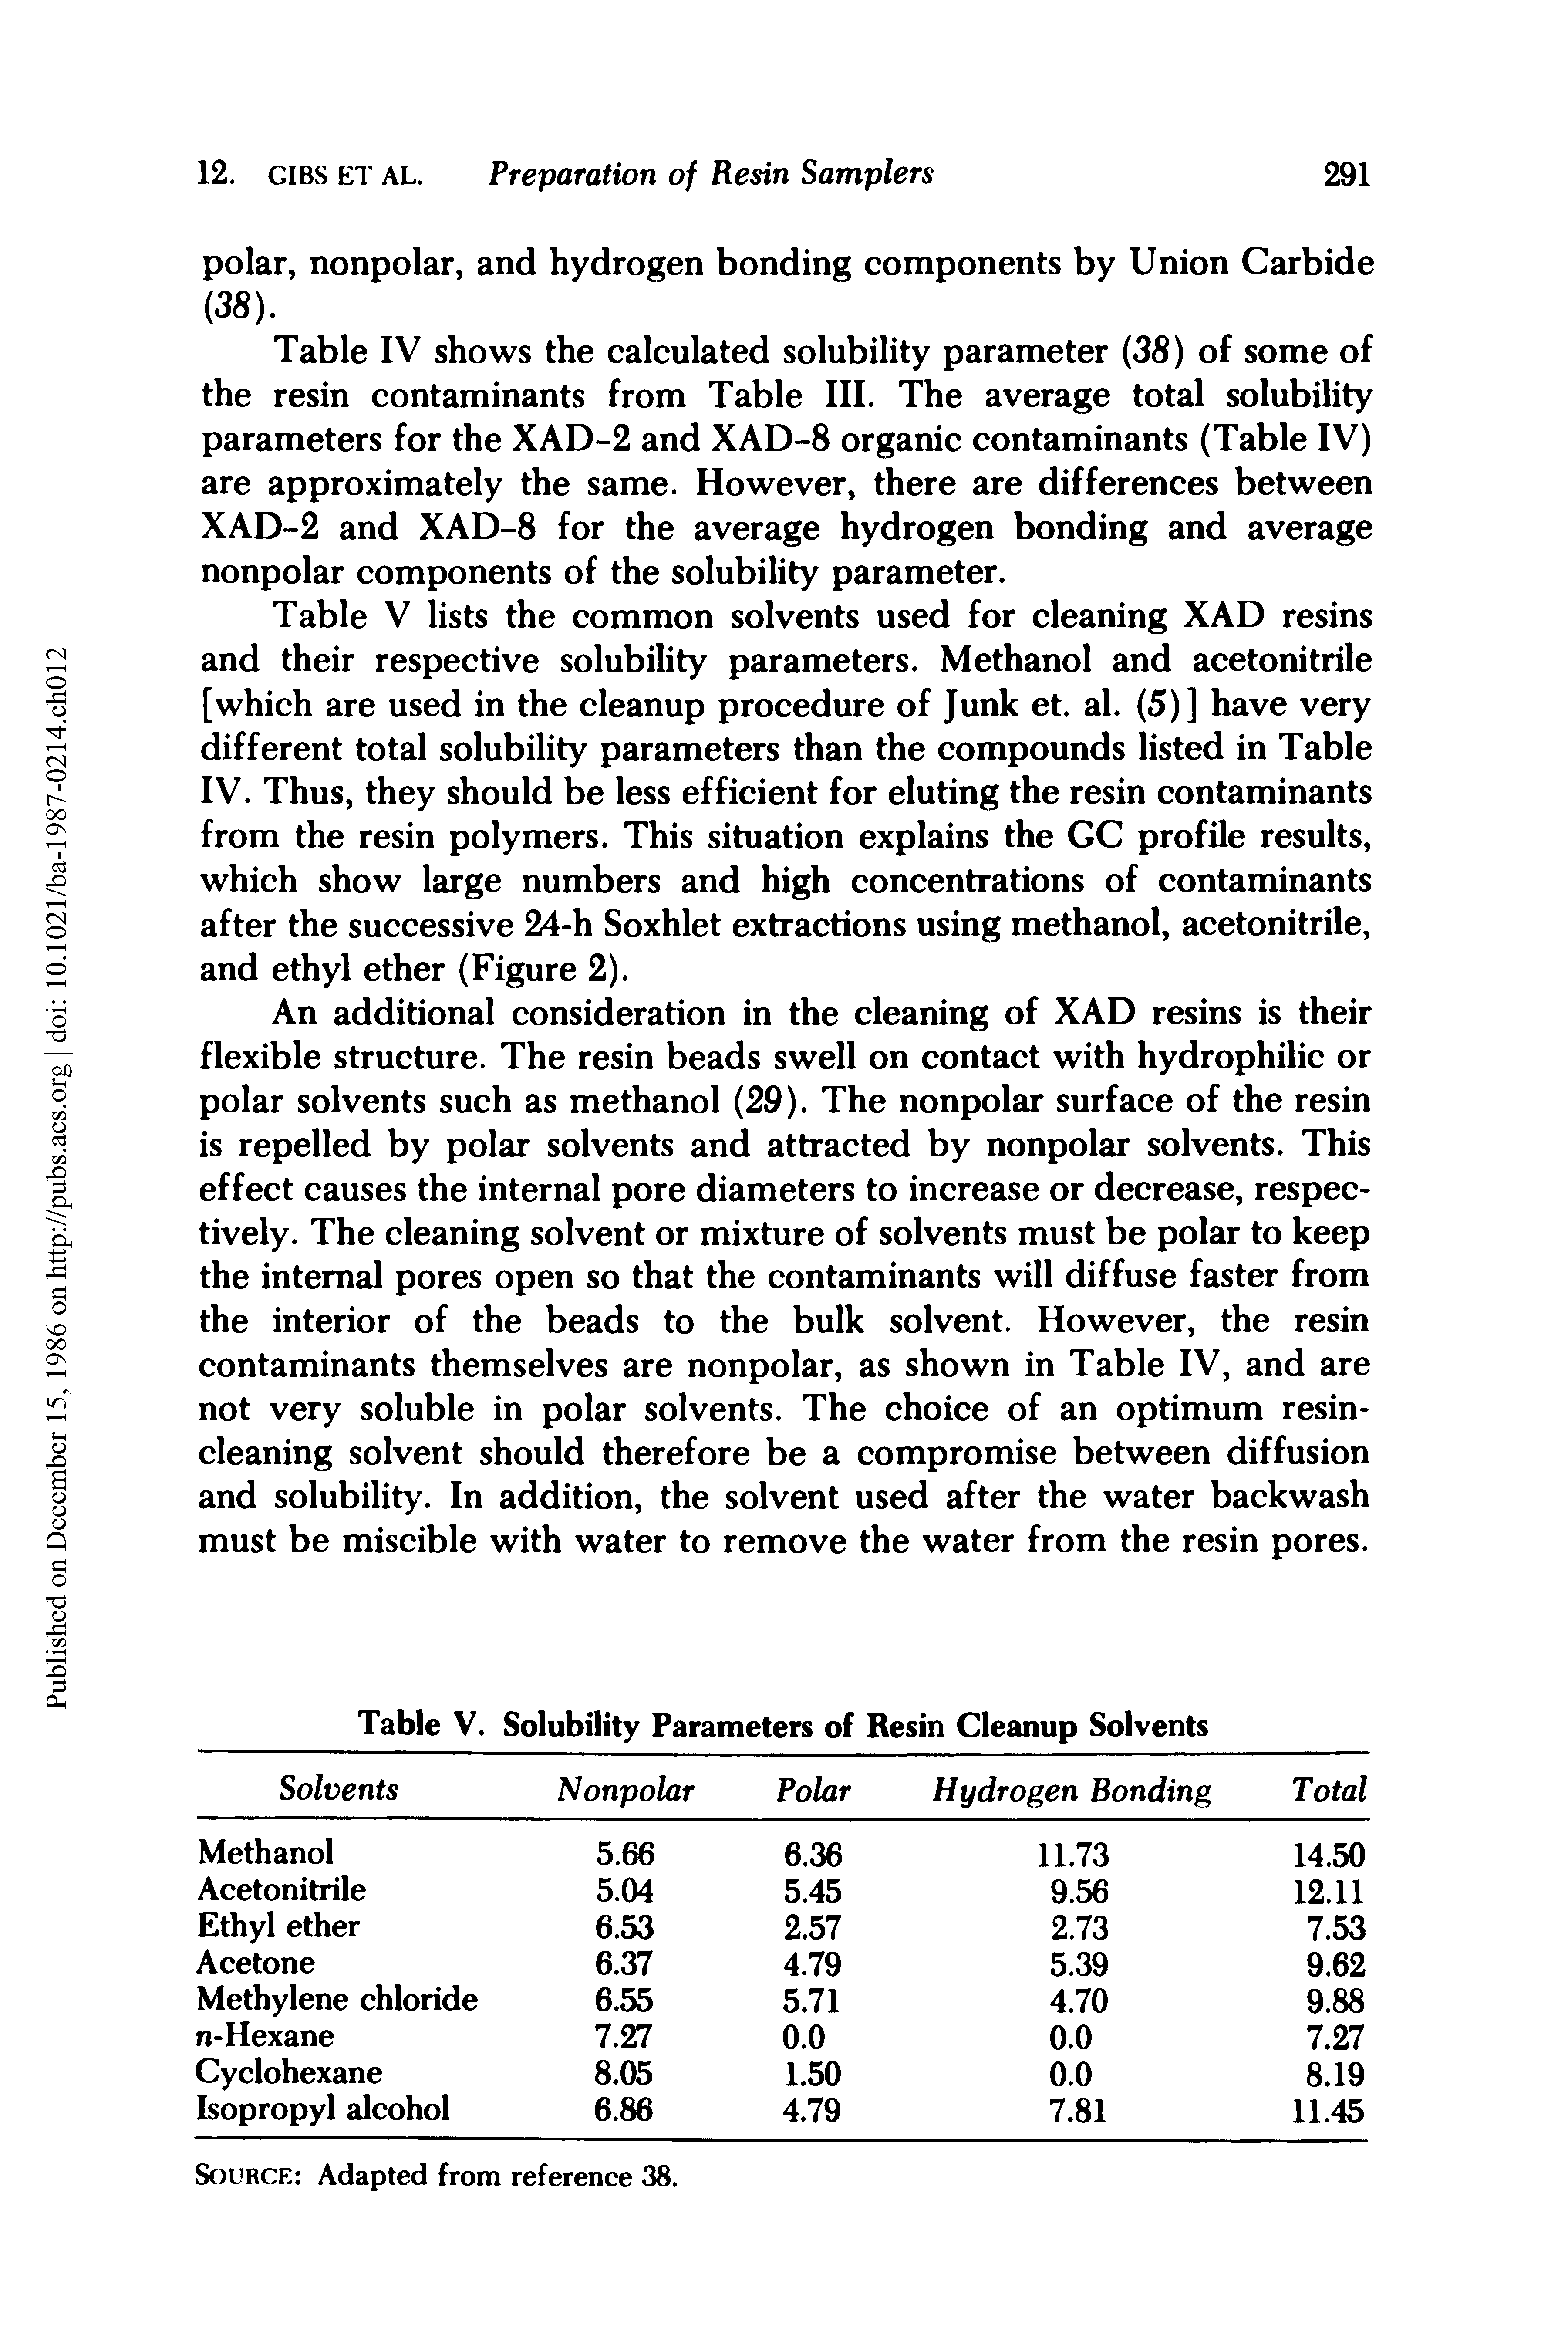 Table IV shows the calculated solubility parameter (38) of some of the resin contaminants from Table III. The average total solubility parameters for the XAD-2 and XAD-8 organic contaminants (Table IV) are approximately the same. However, there are differences between XAD-2 and XAD-8 for the average hydrogen bonding and average nonpolar components of the solubility parameter.